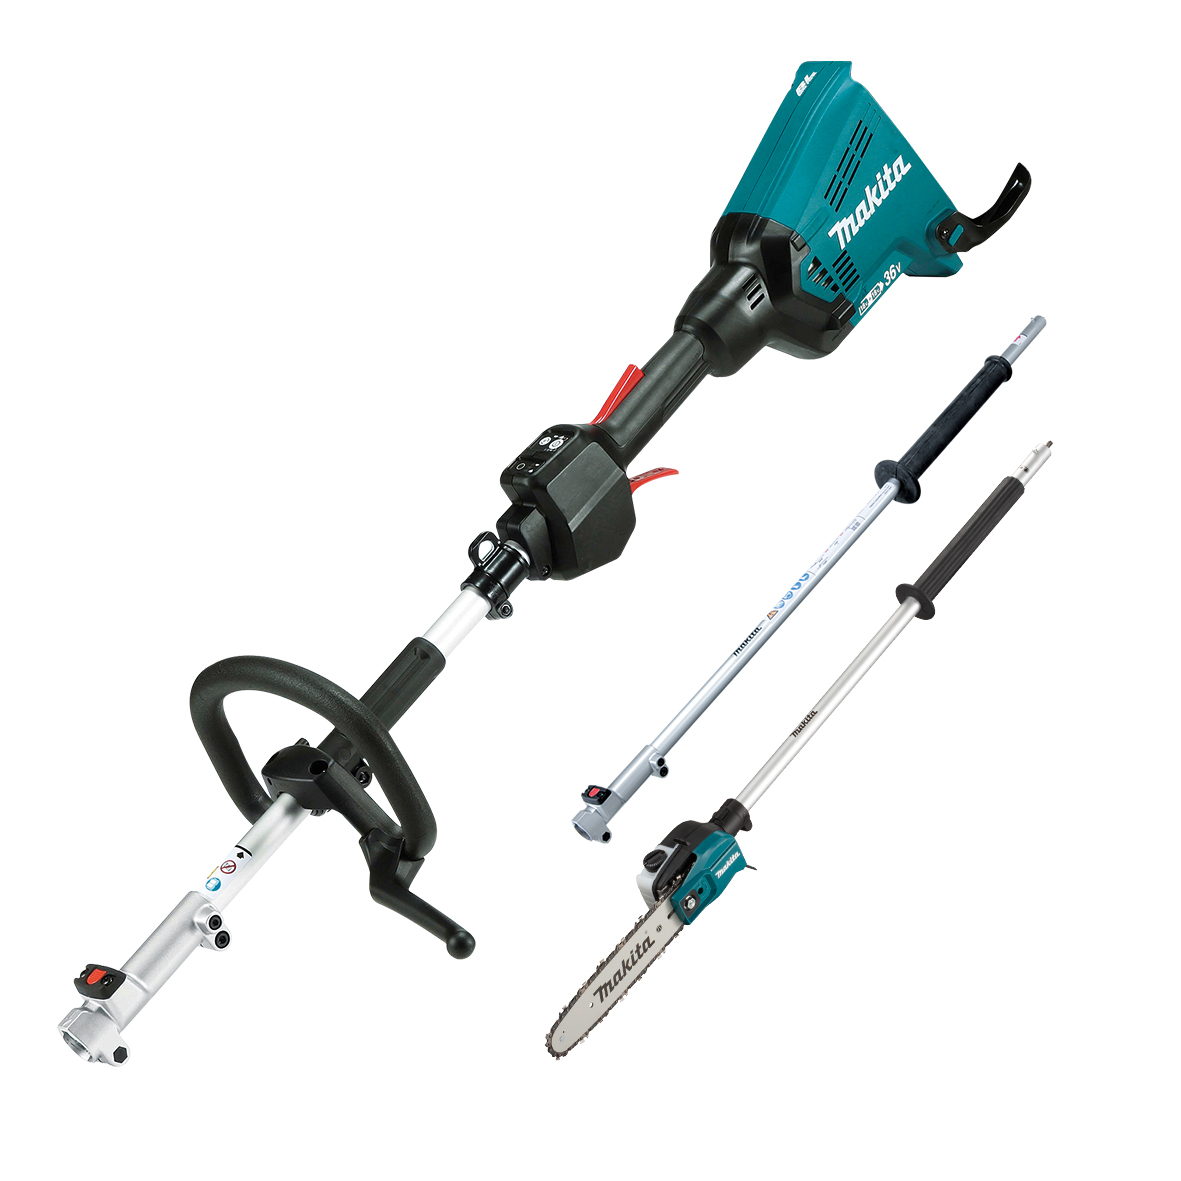 Makita 18Vx2 Brushless Multi-Function Power Head with Attachments (tool only) DUX60ZPS